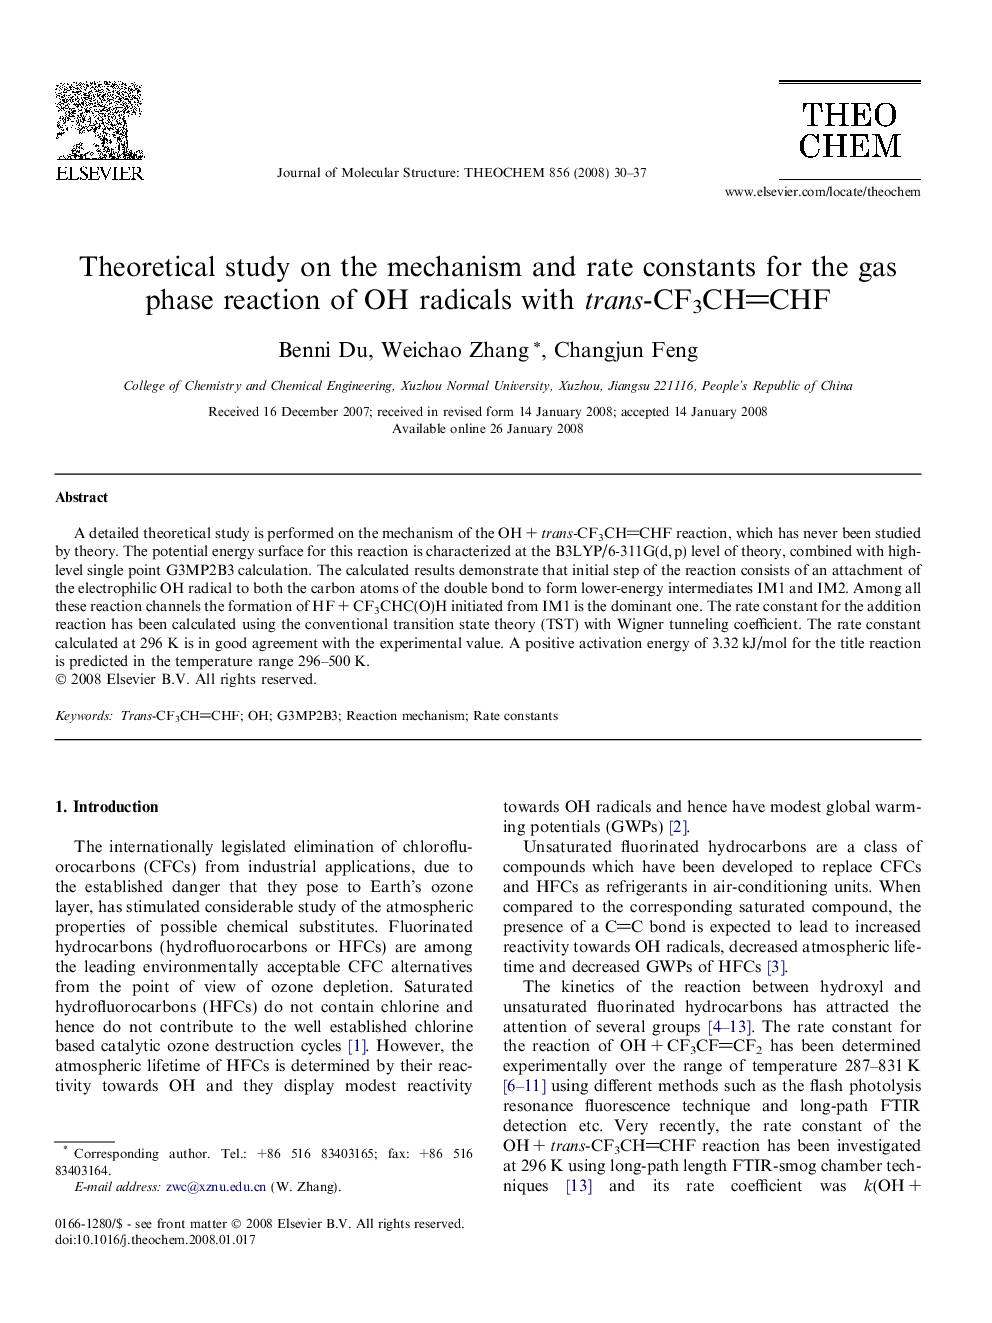 Theoretical study on the mechanism and rate constants for the gas phase reaction of OH radicals with trans-CF3CHCHF